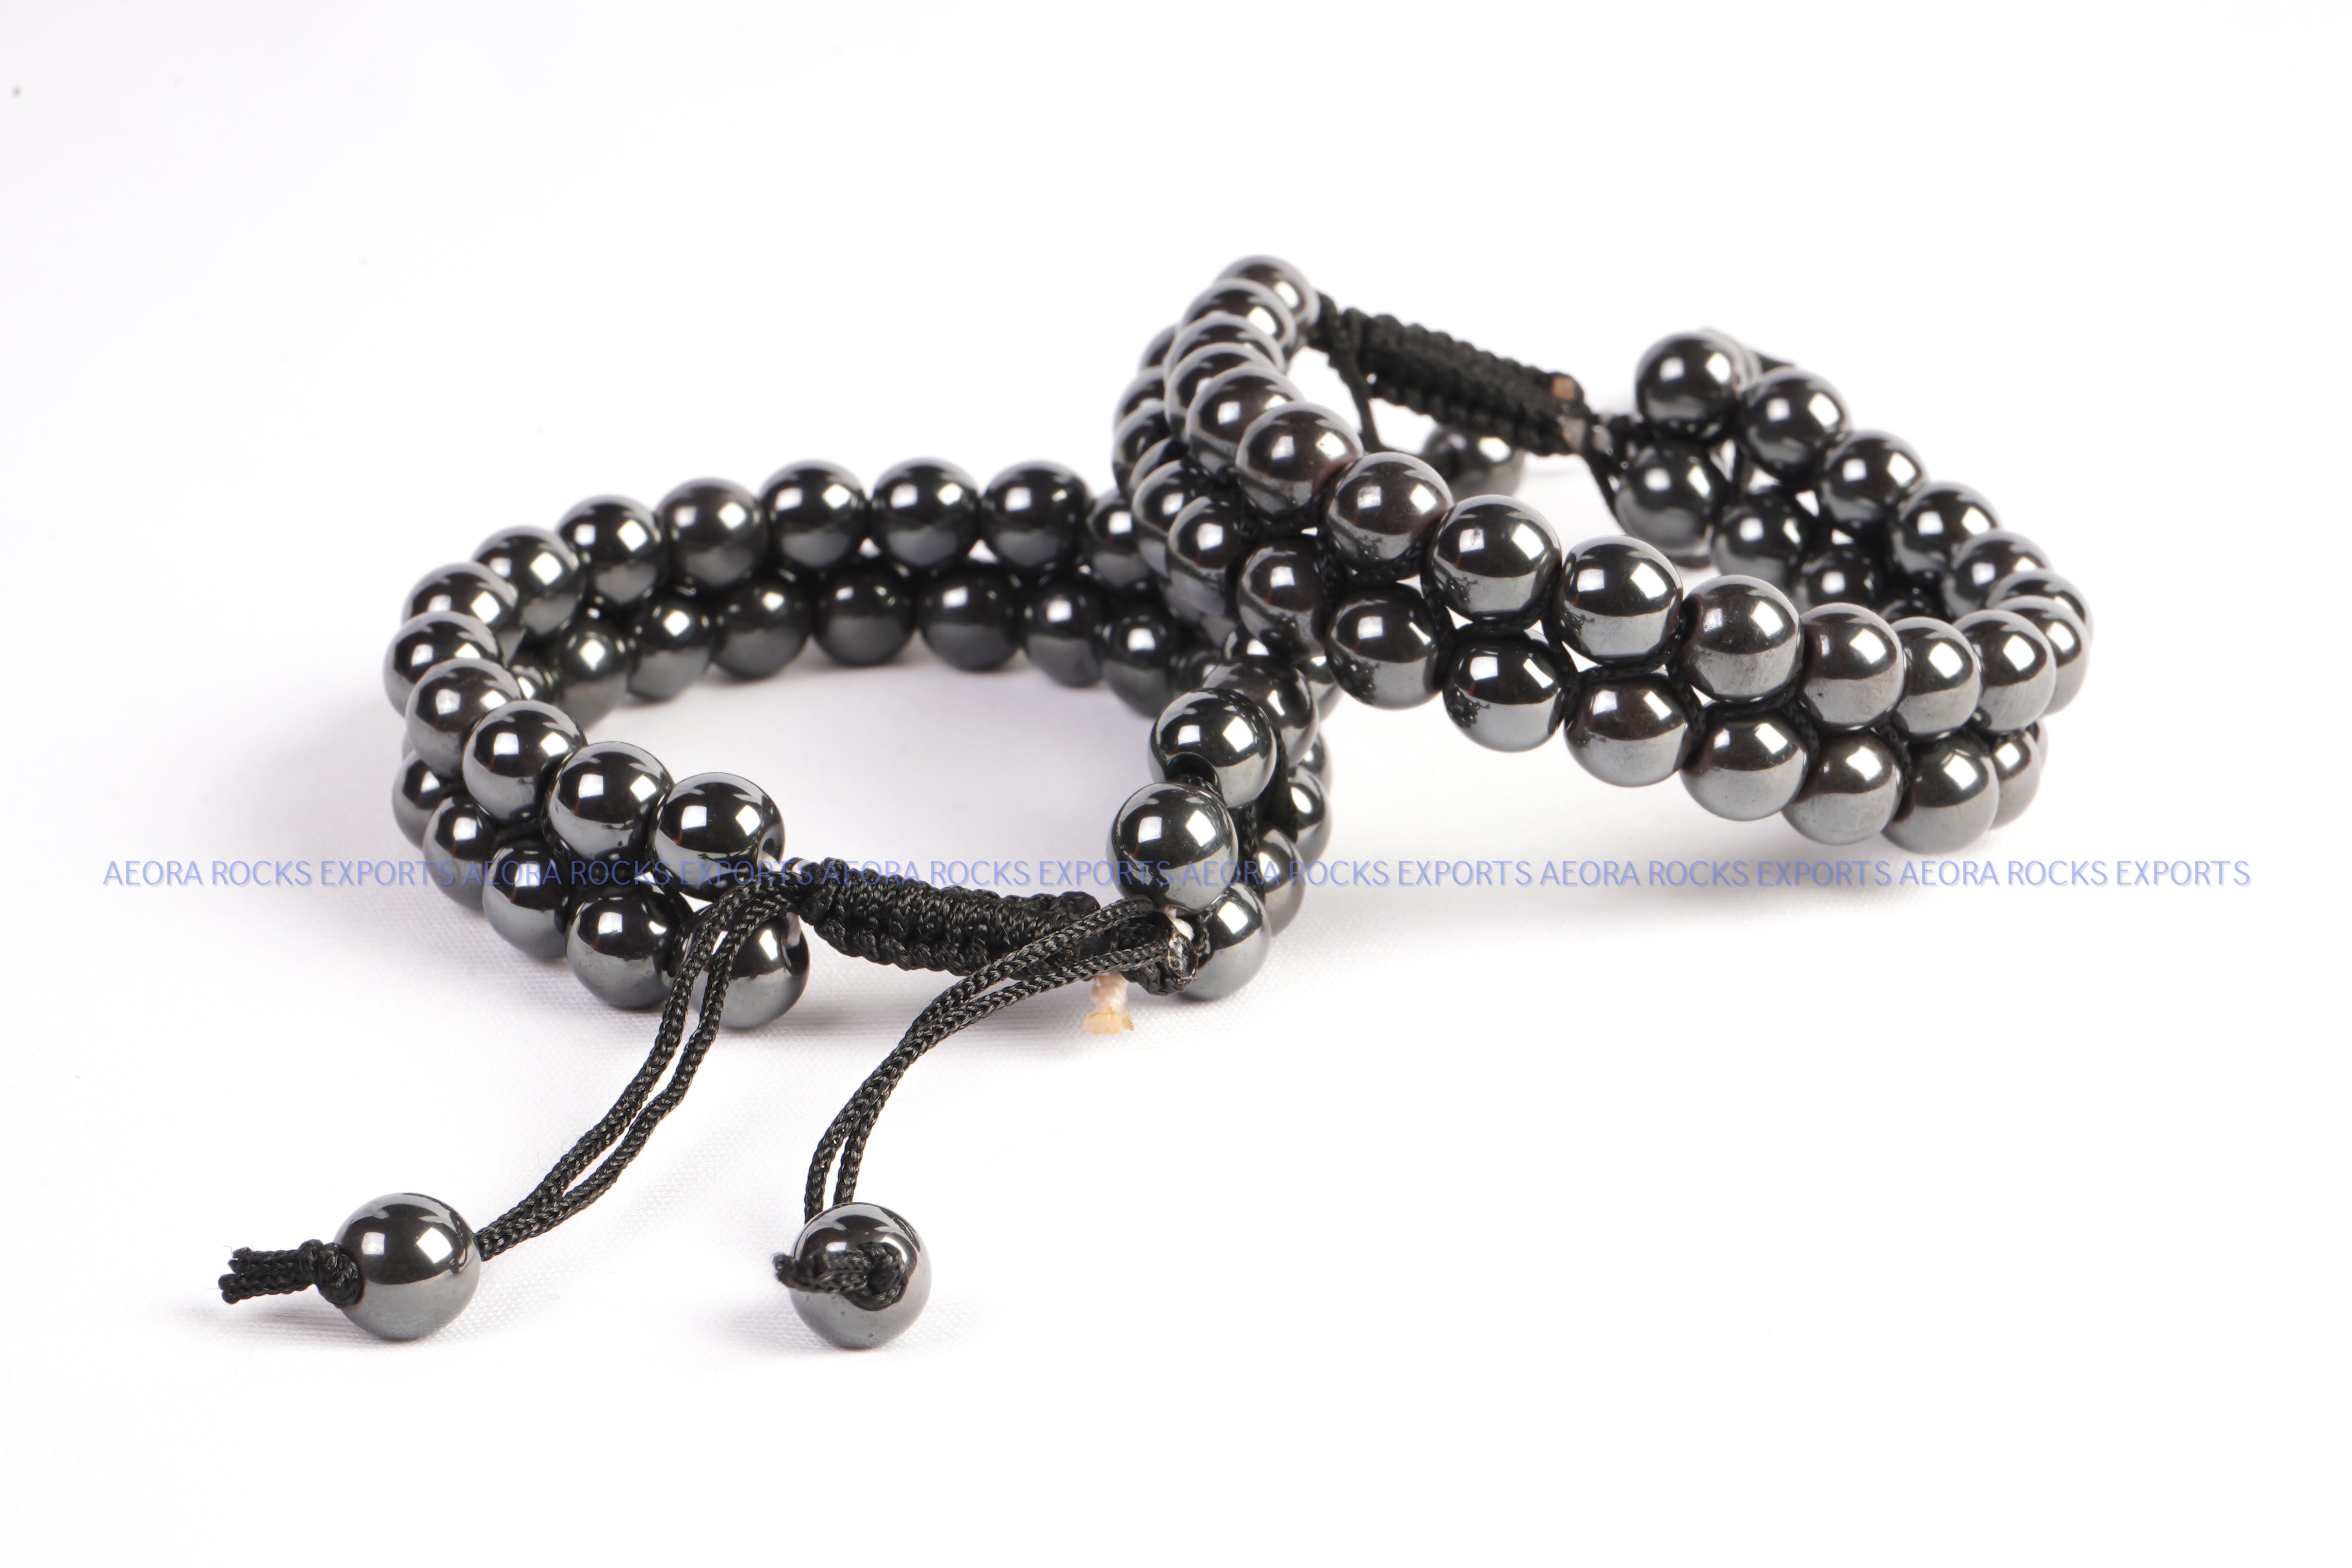 Hematite | Meaning, Hidden Knowledge, Chakra Healing, Feng Shui, More